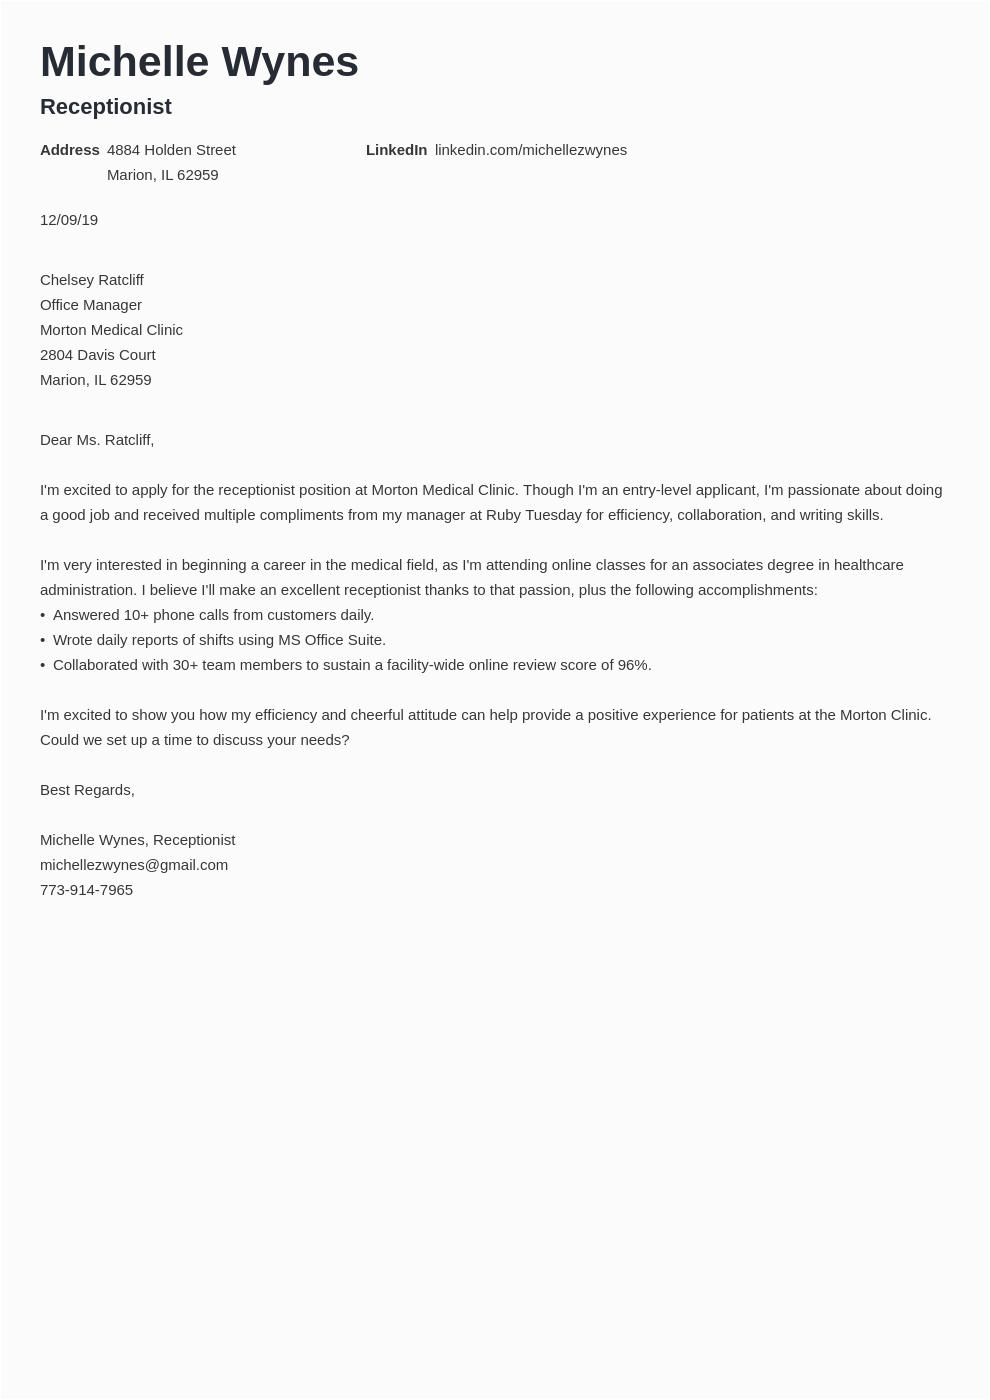 Sample Cover Letter for Resume No Experience How to Write A Cover Letter with No Experience—examples